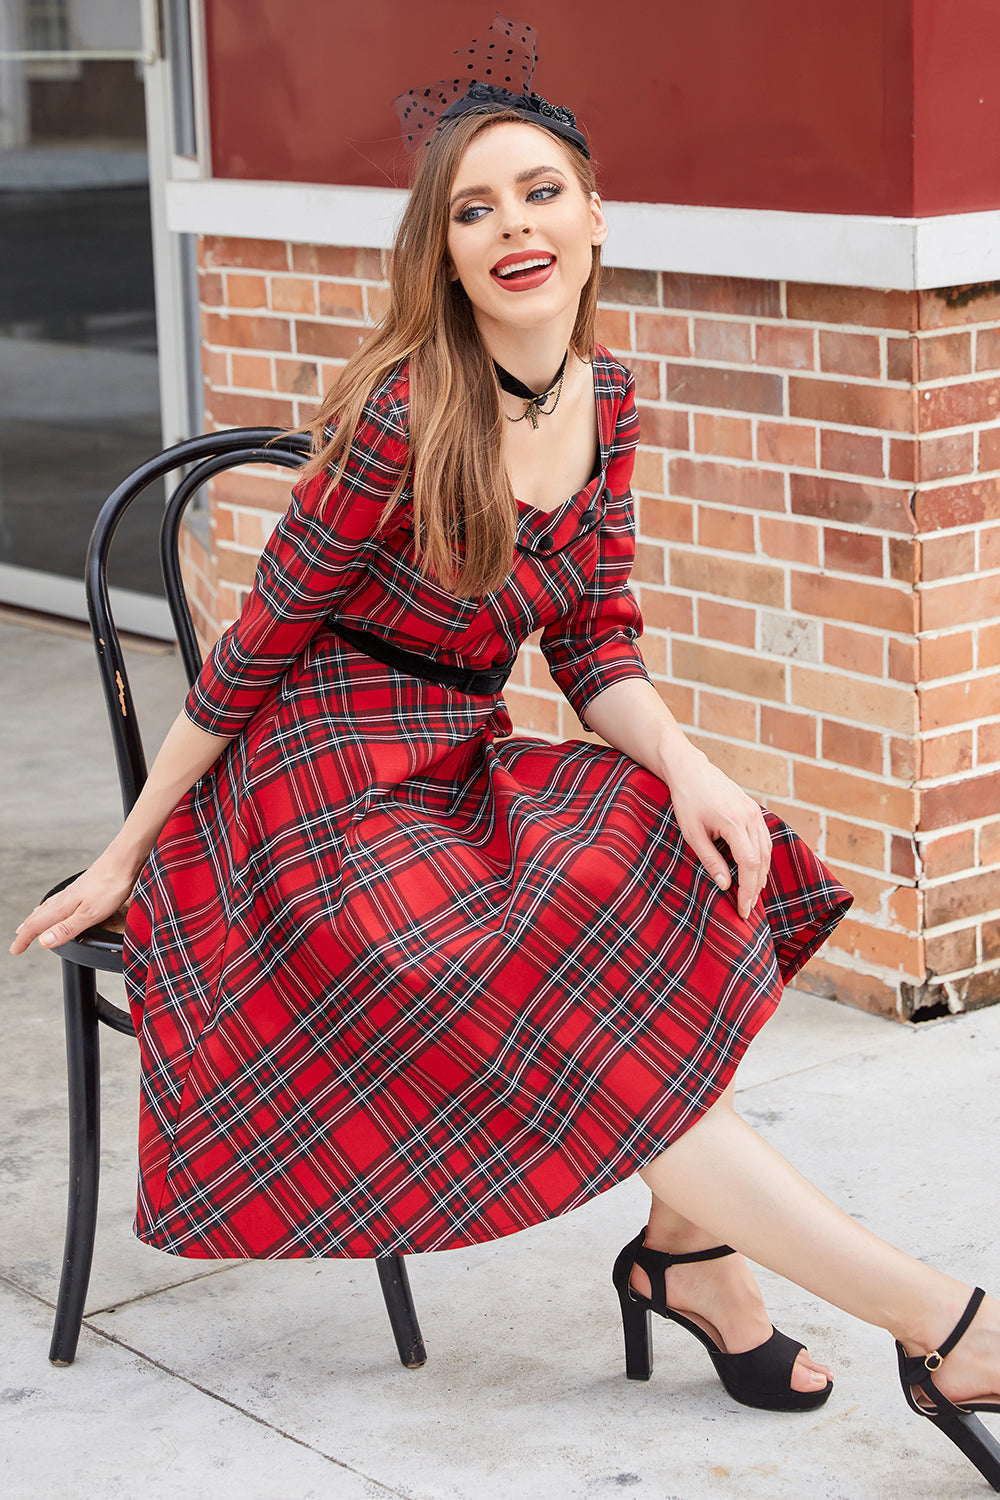 Plaid Red Vintage Dress with Sleeves